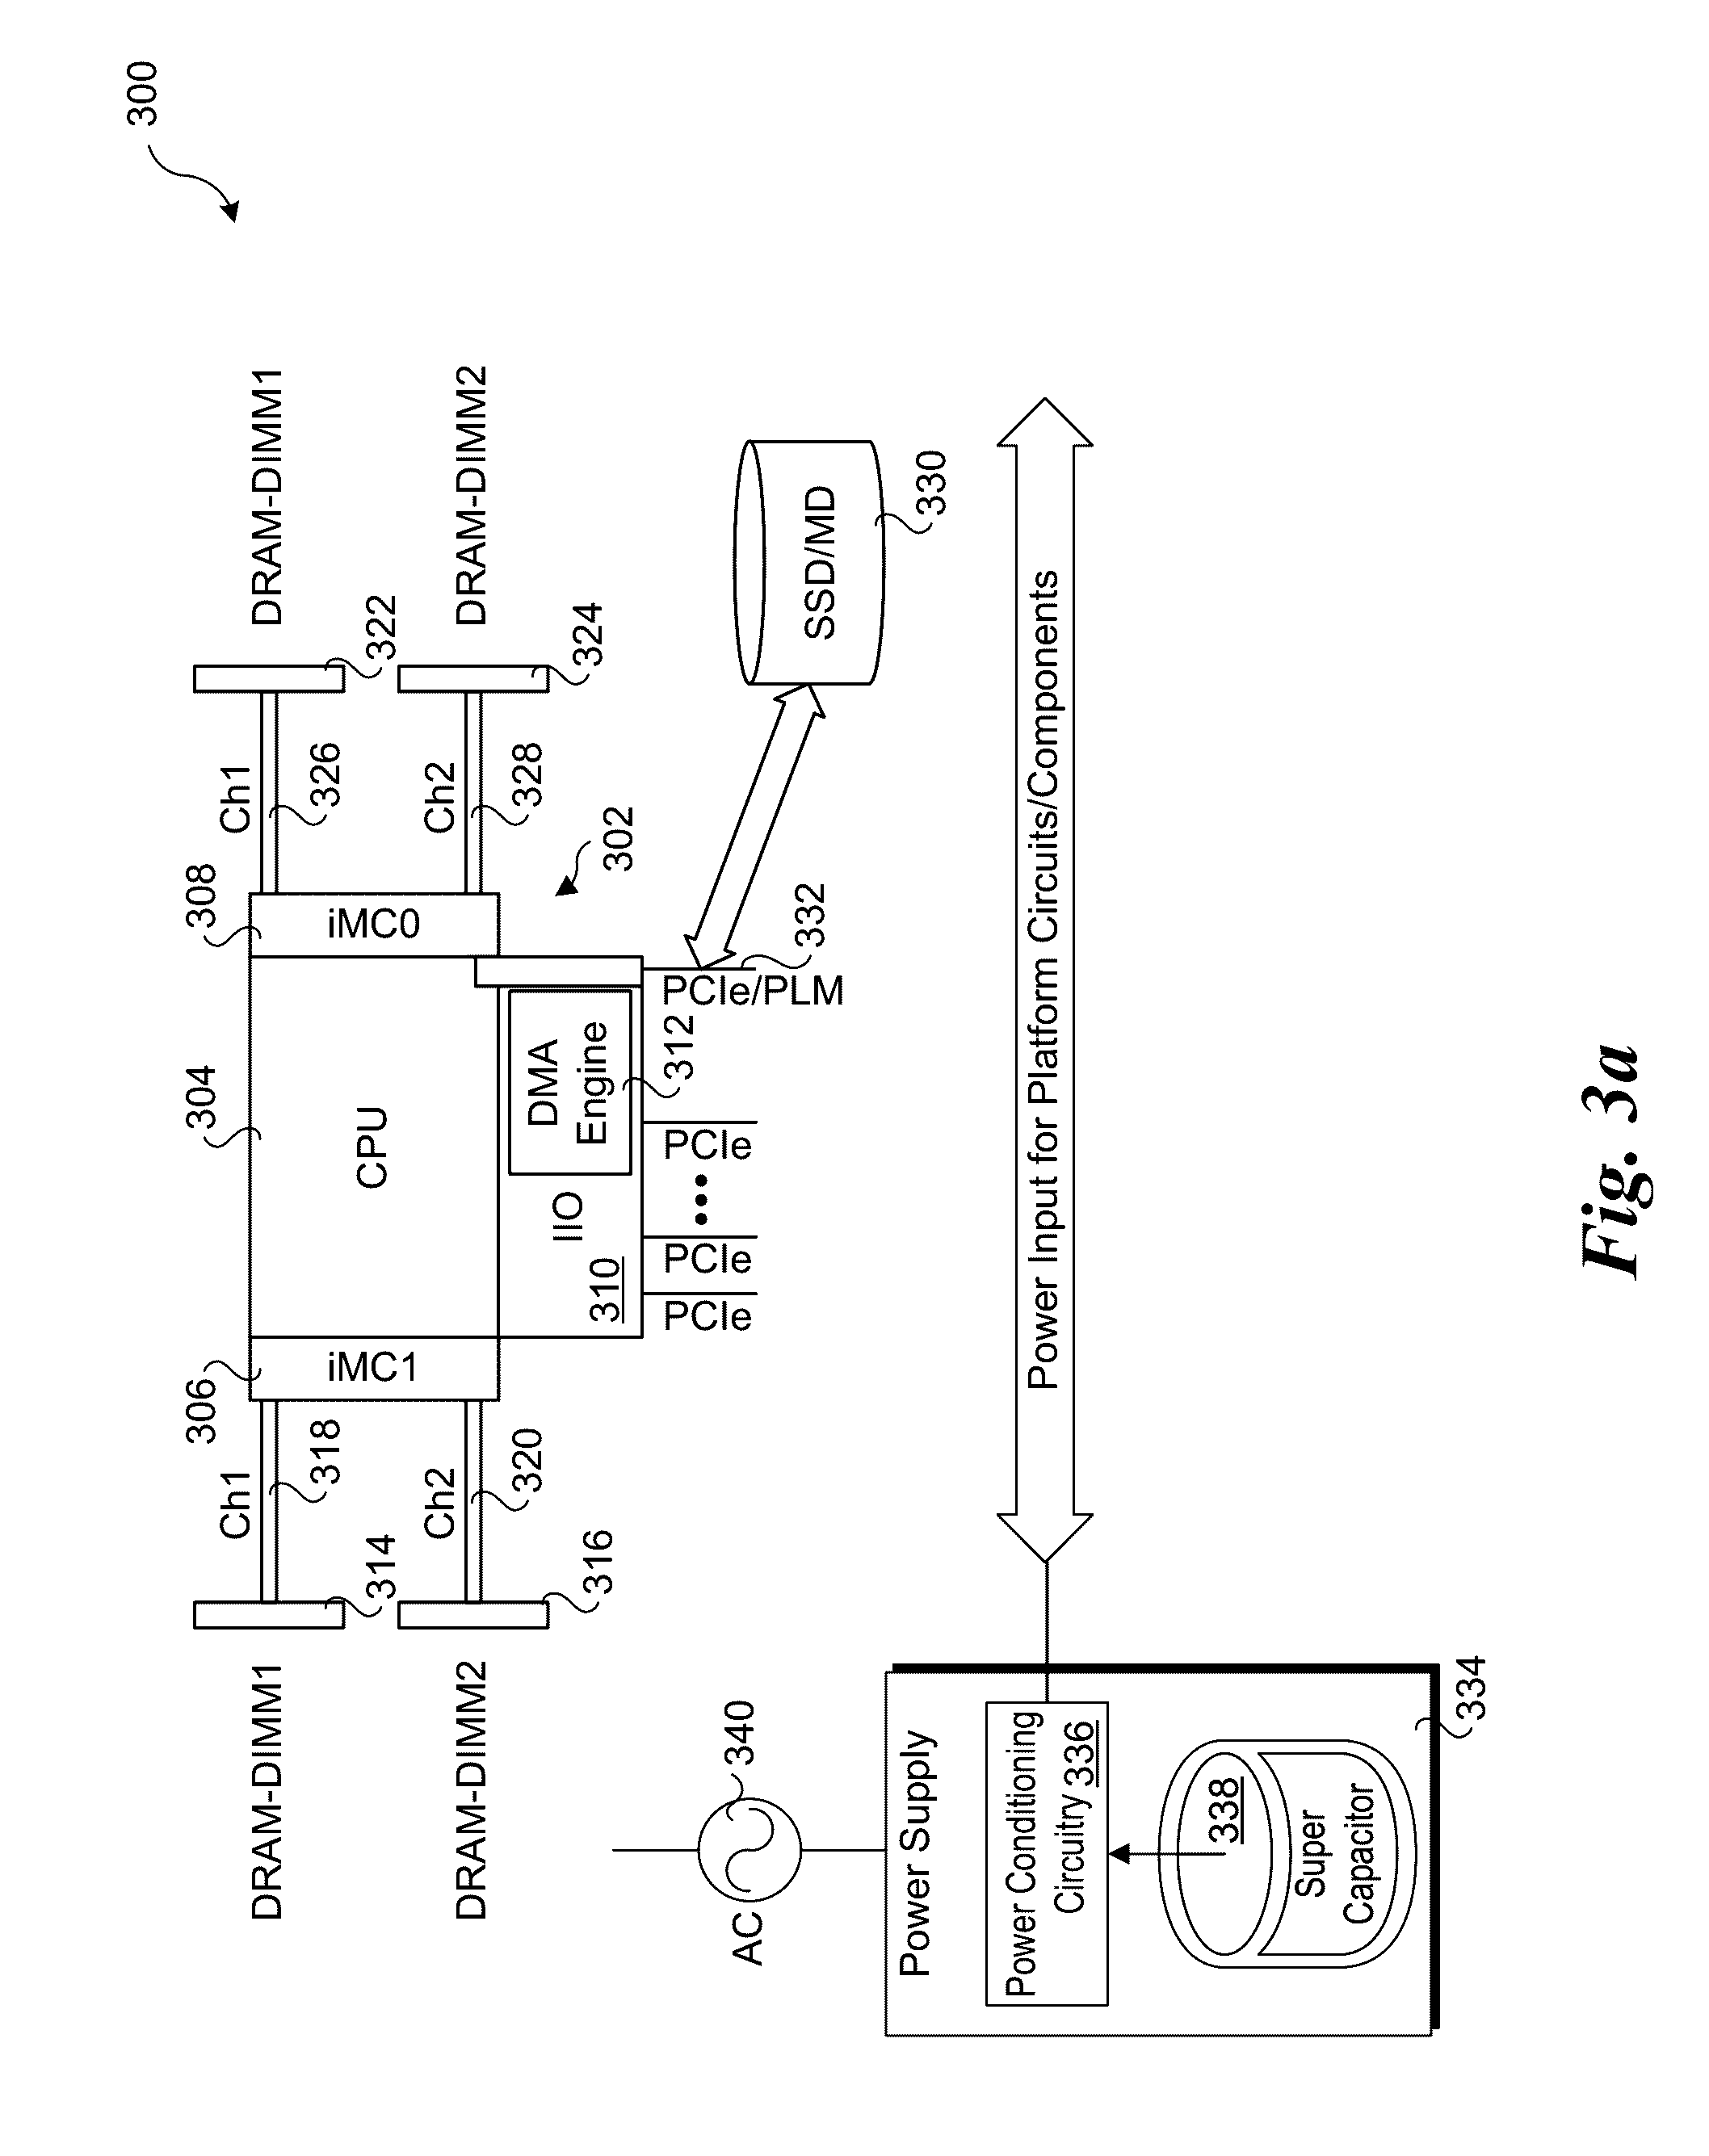 Processor and platform assisted nvdimm solution using standard dram and consolidated storage